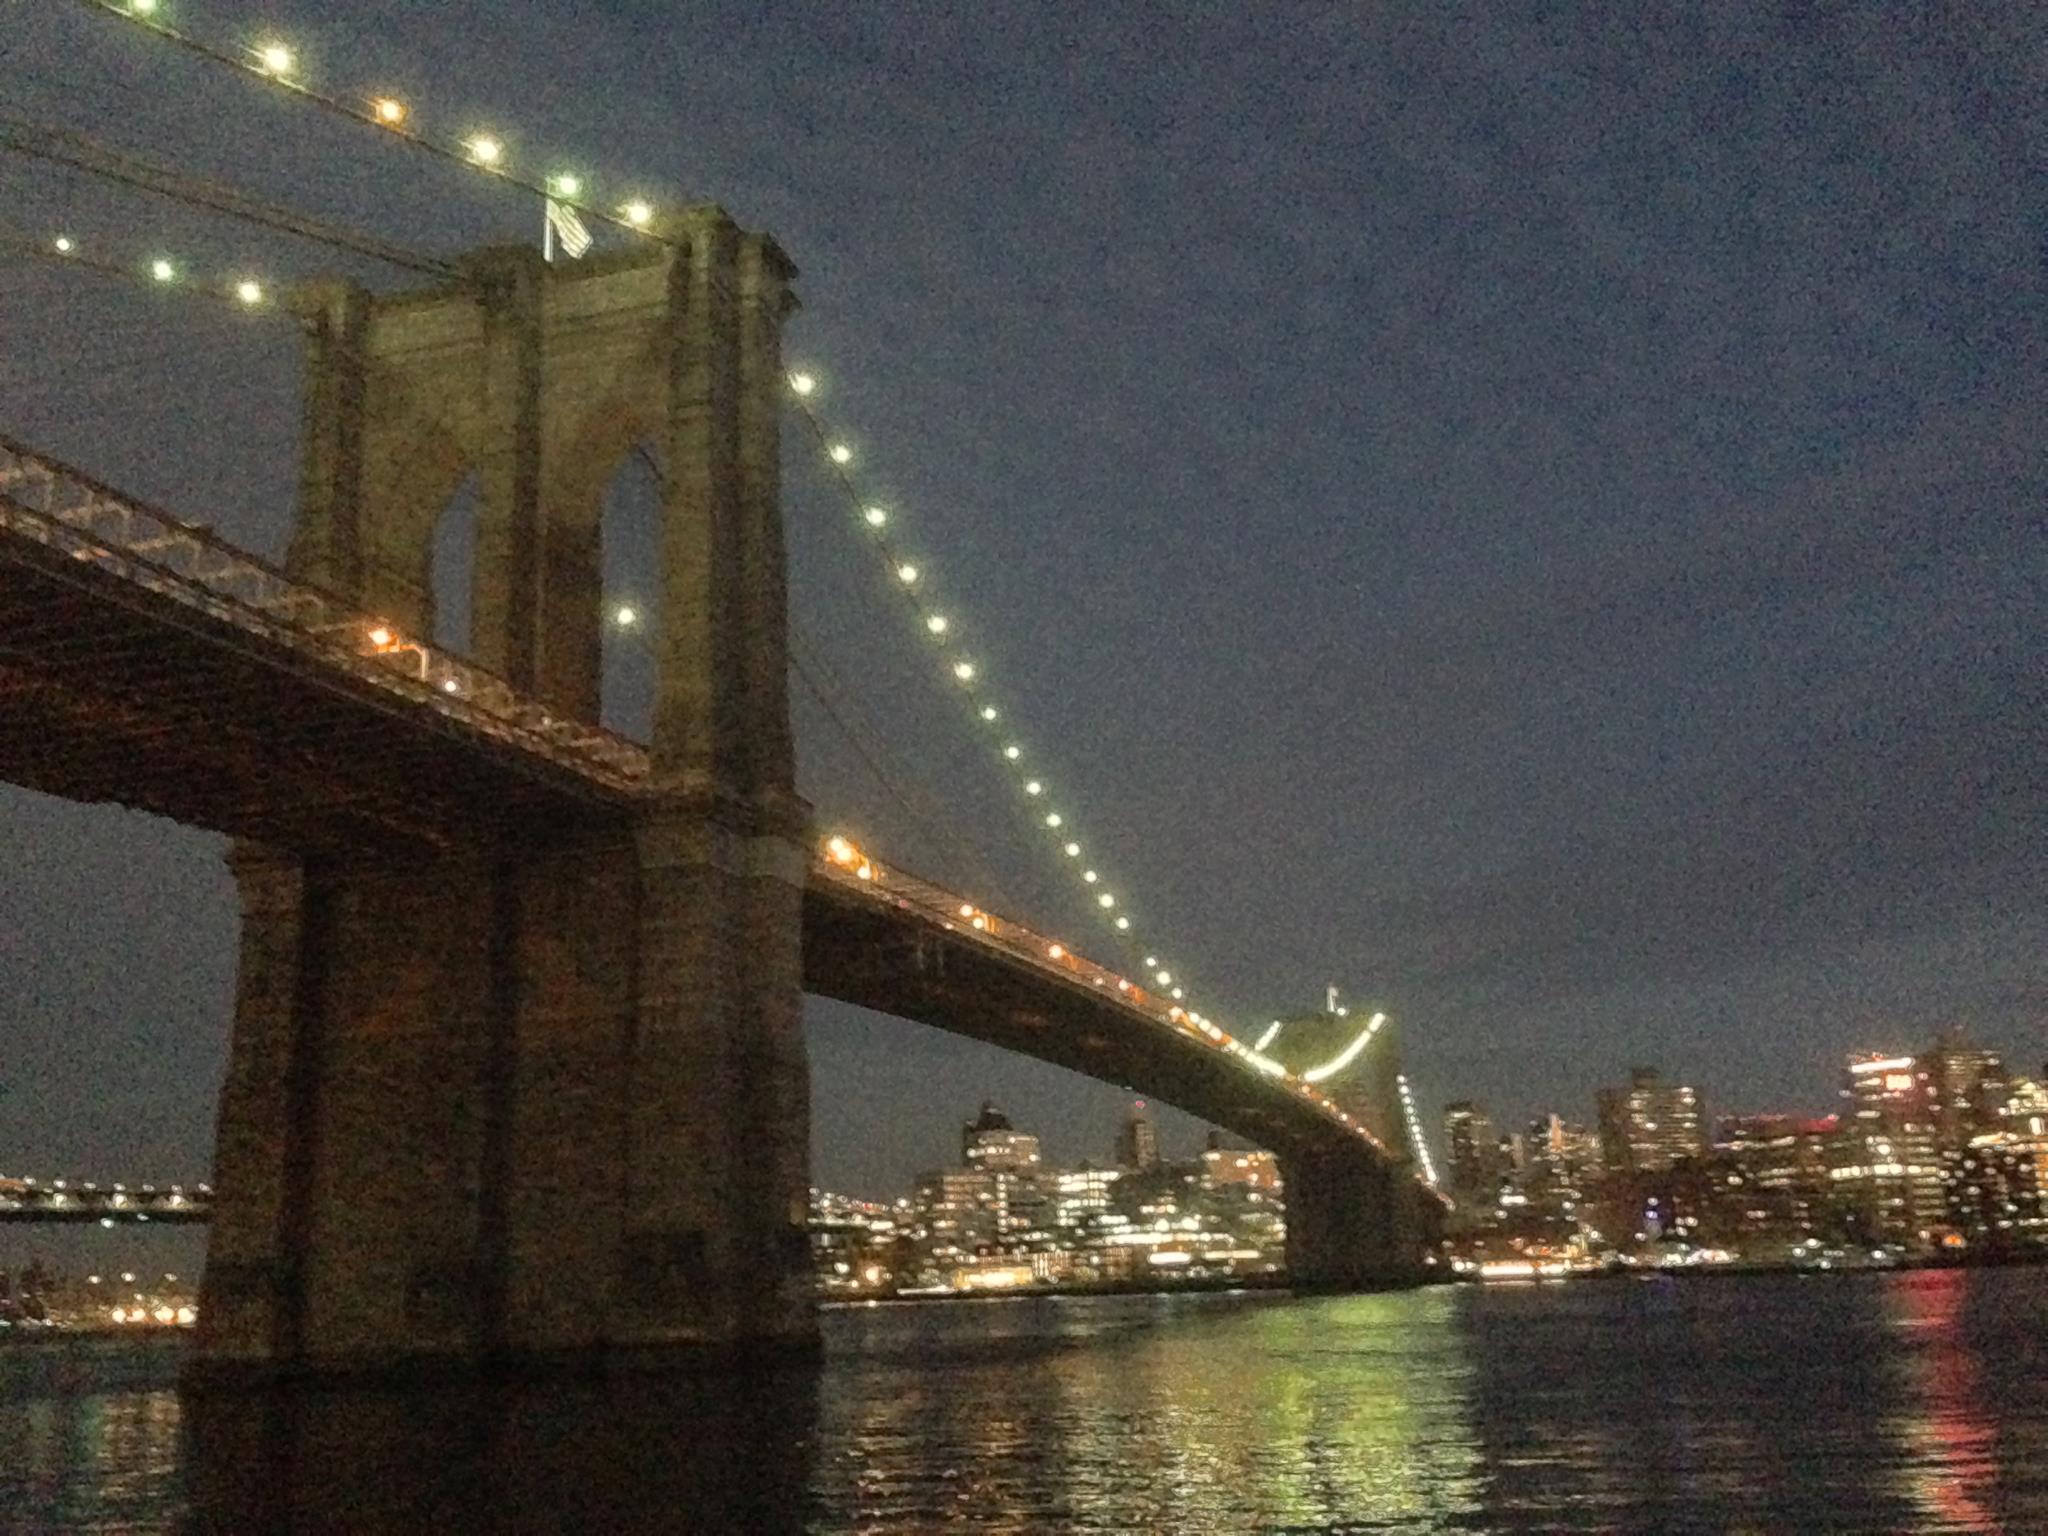 Brooklyn Bridge at dusk from the waterfront.